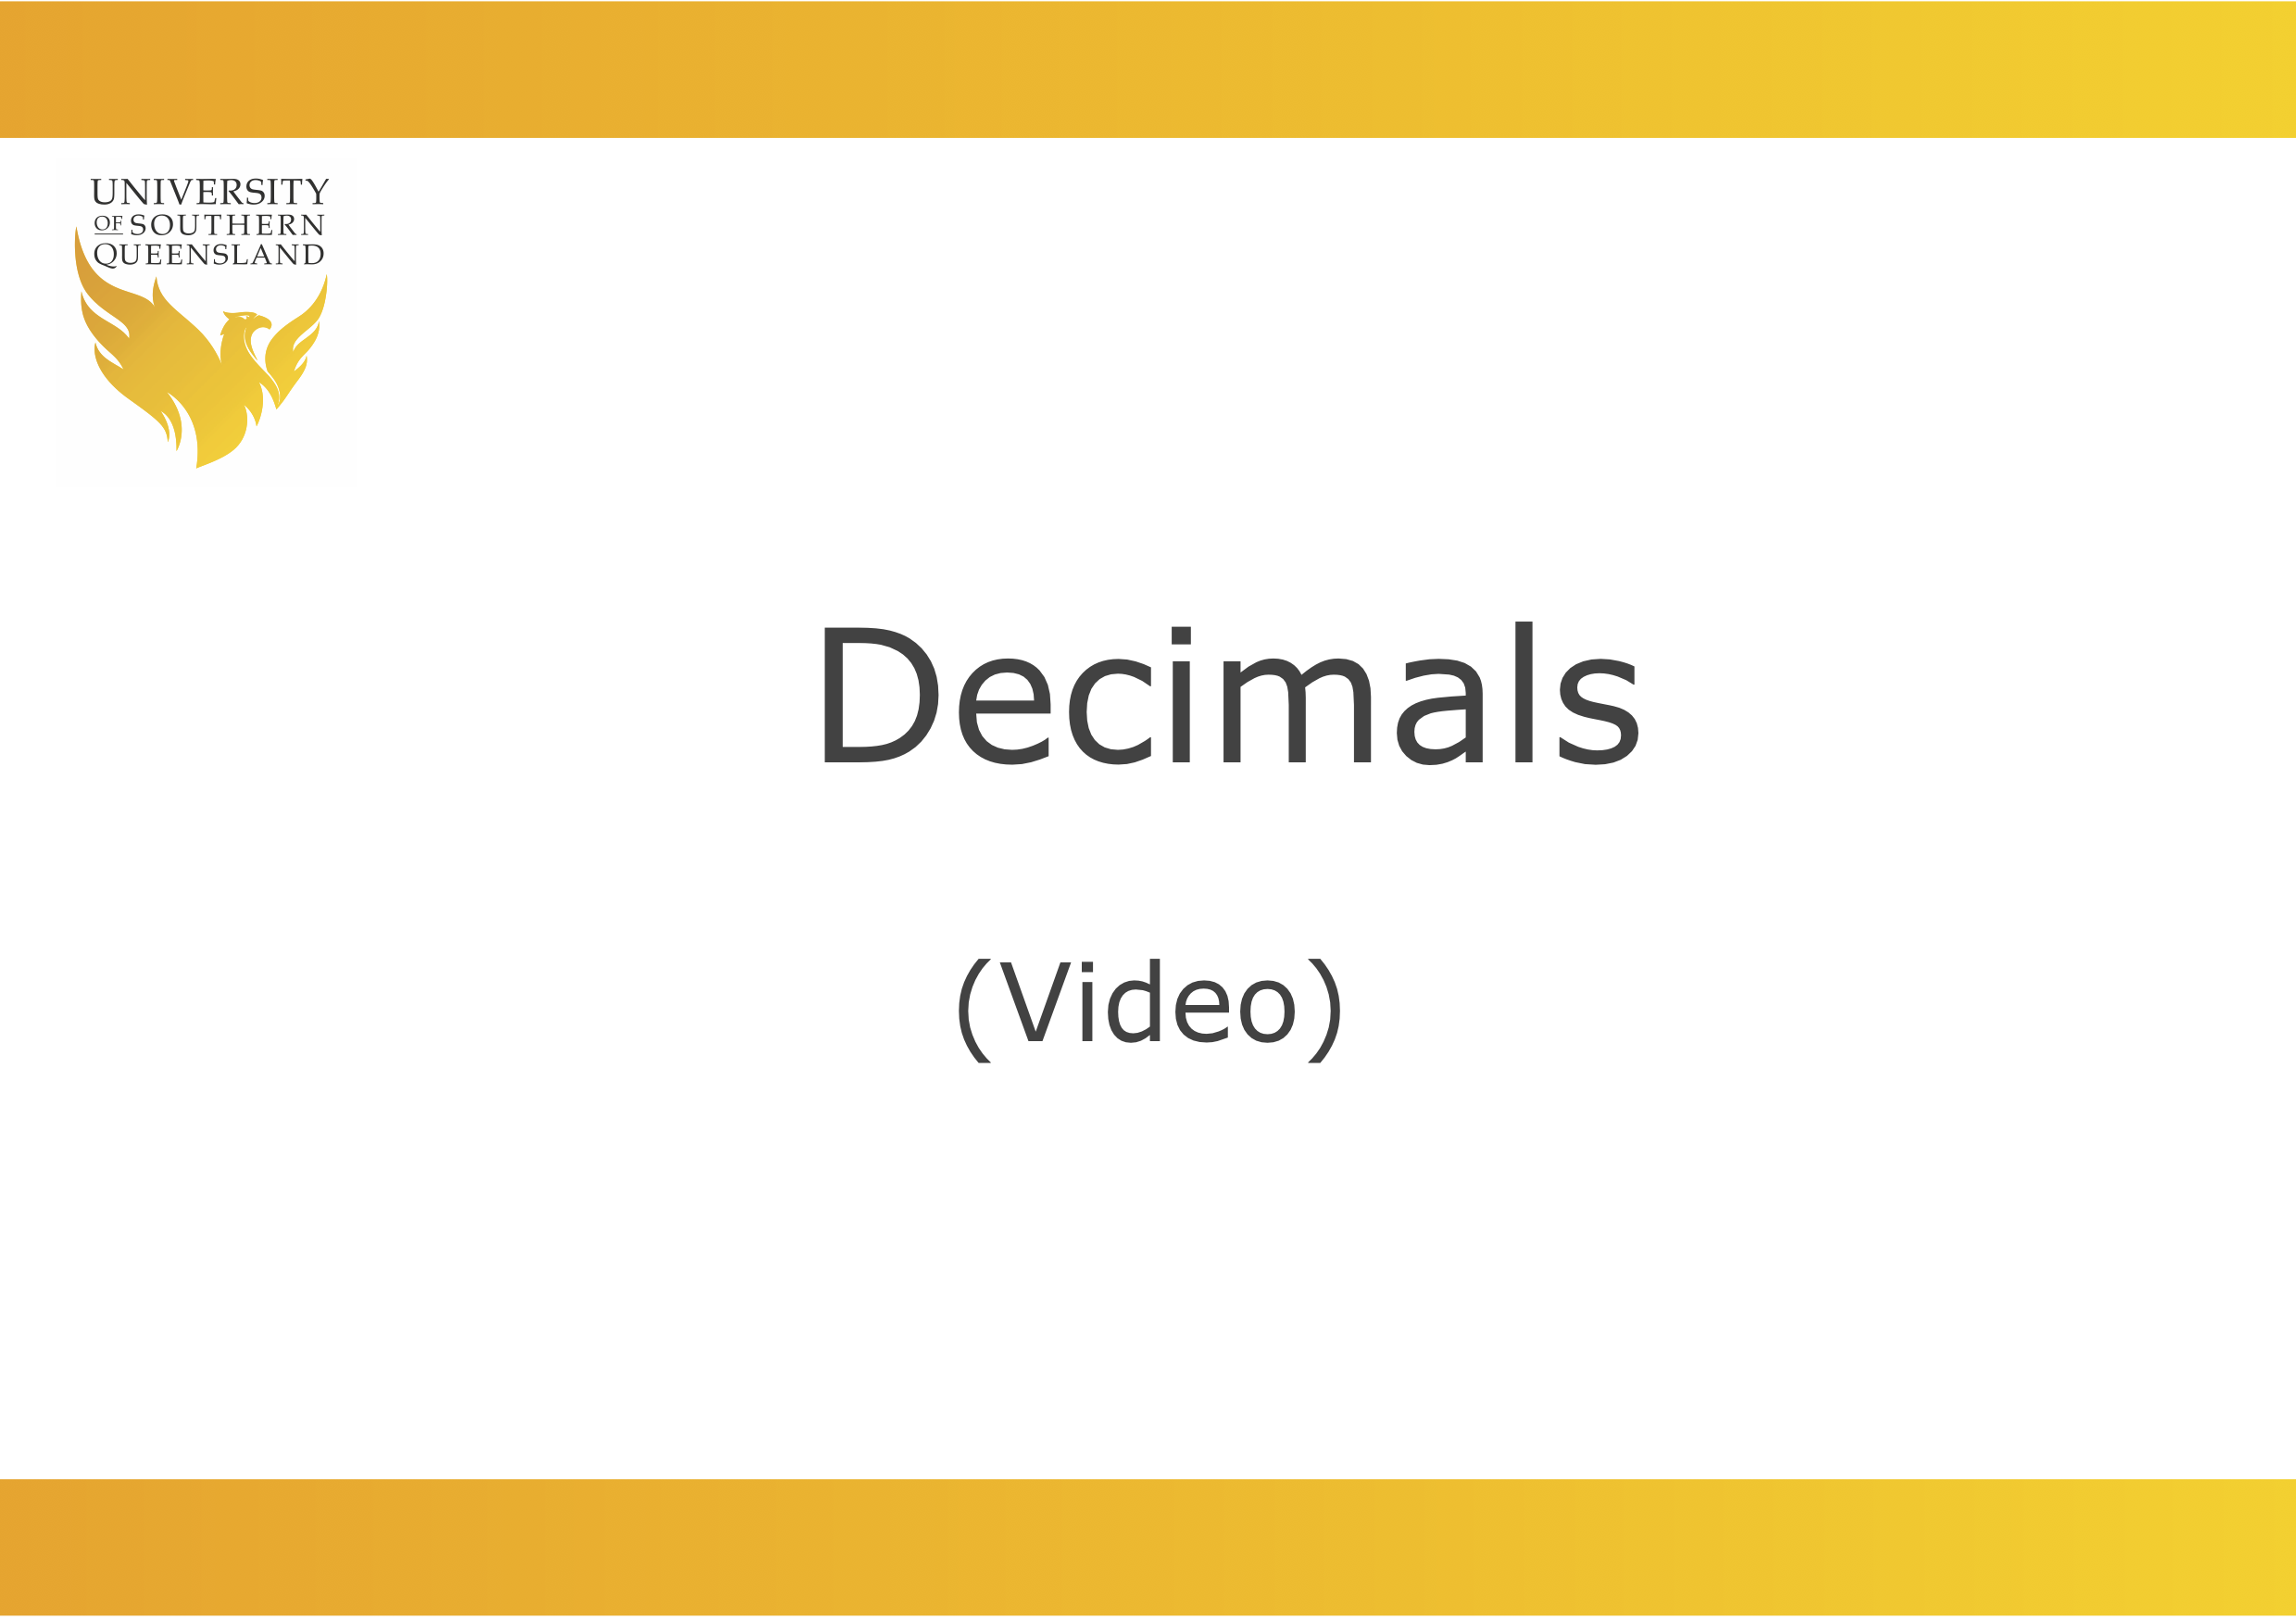 Image to play the video: Decimals: Fractions in other forms.